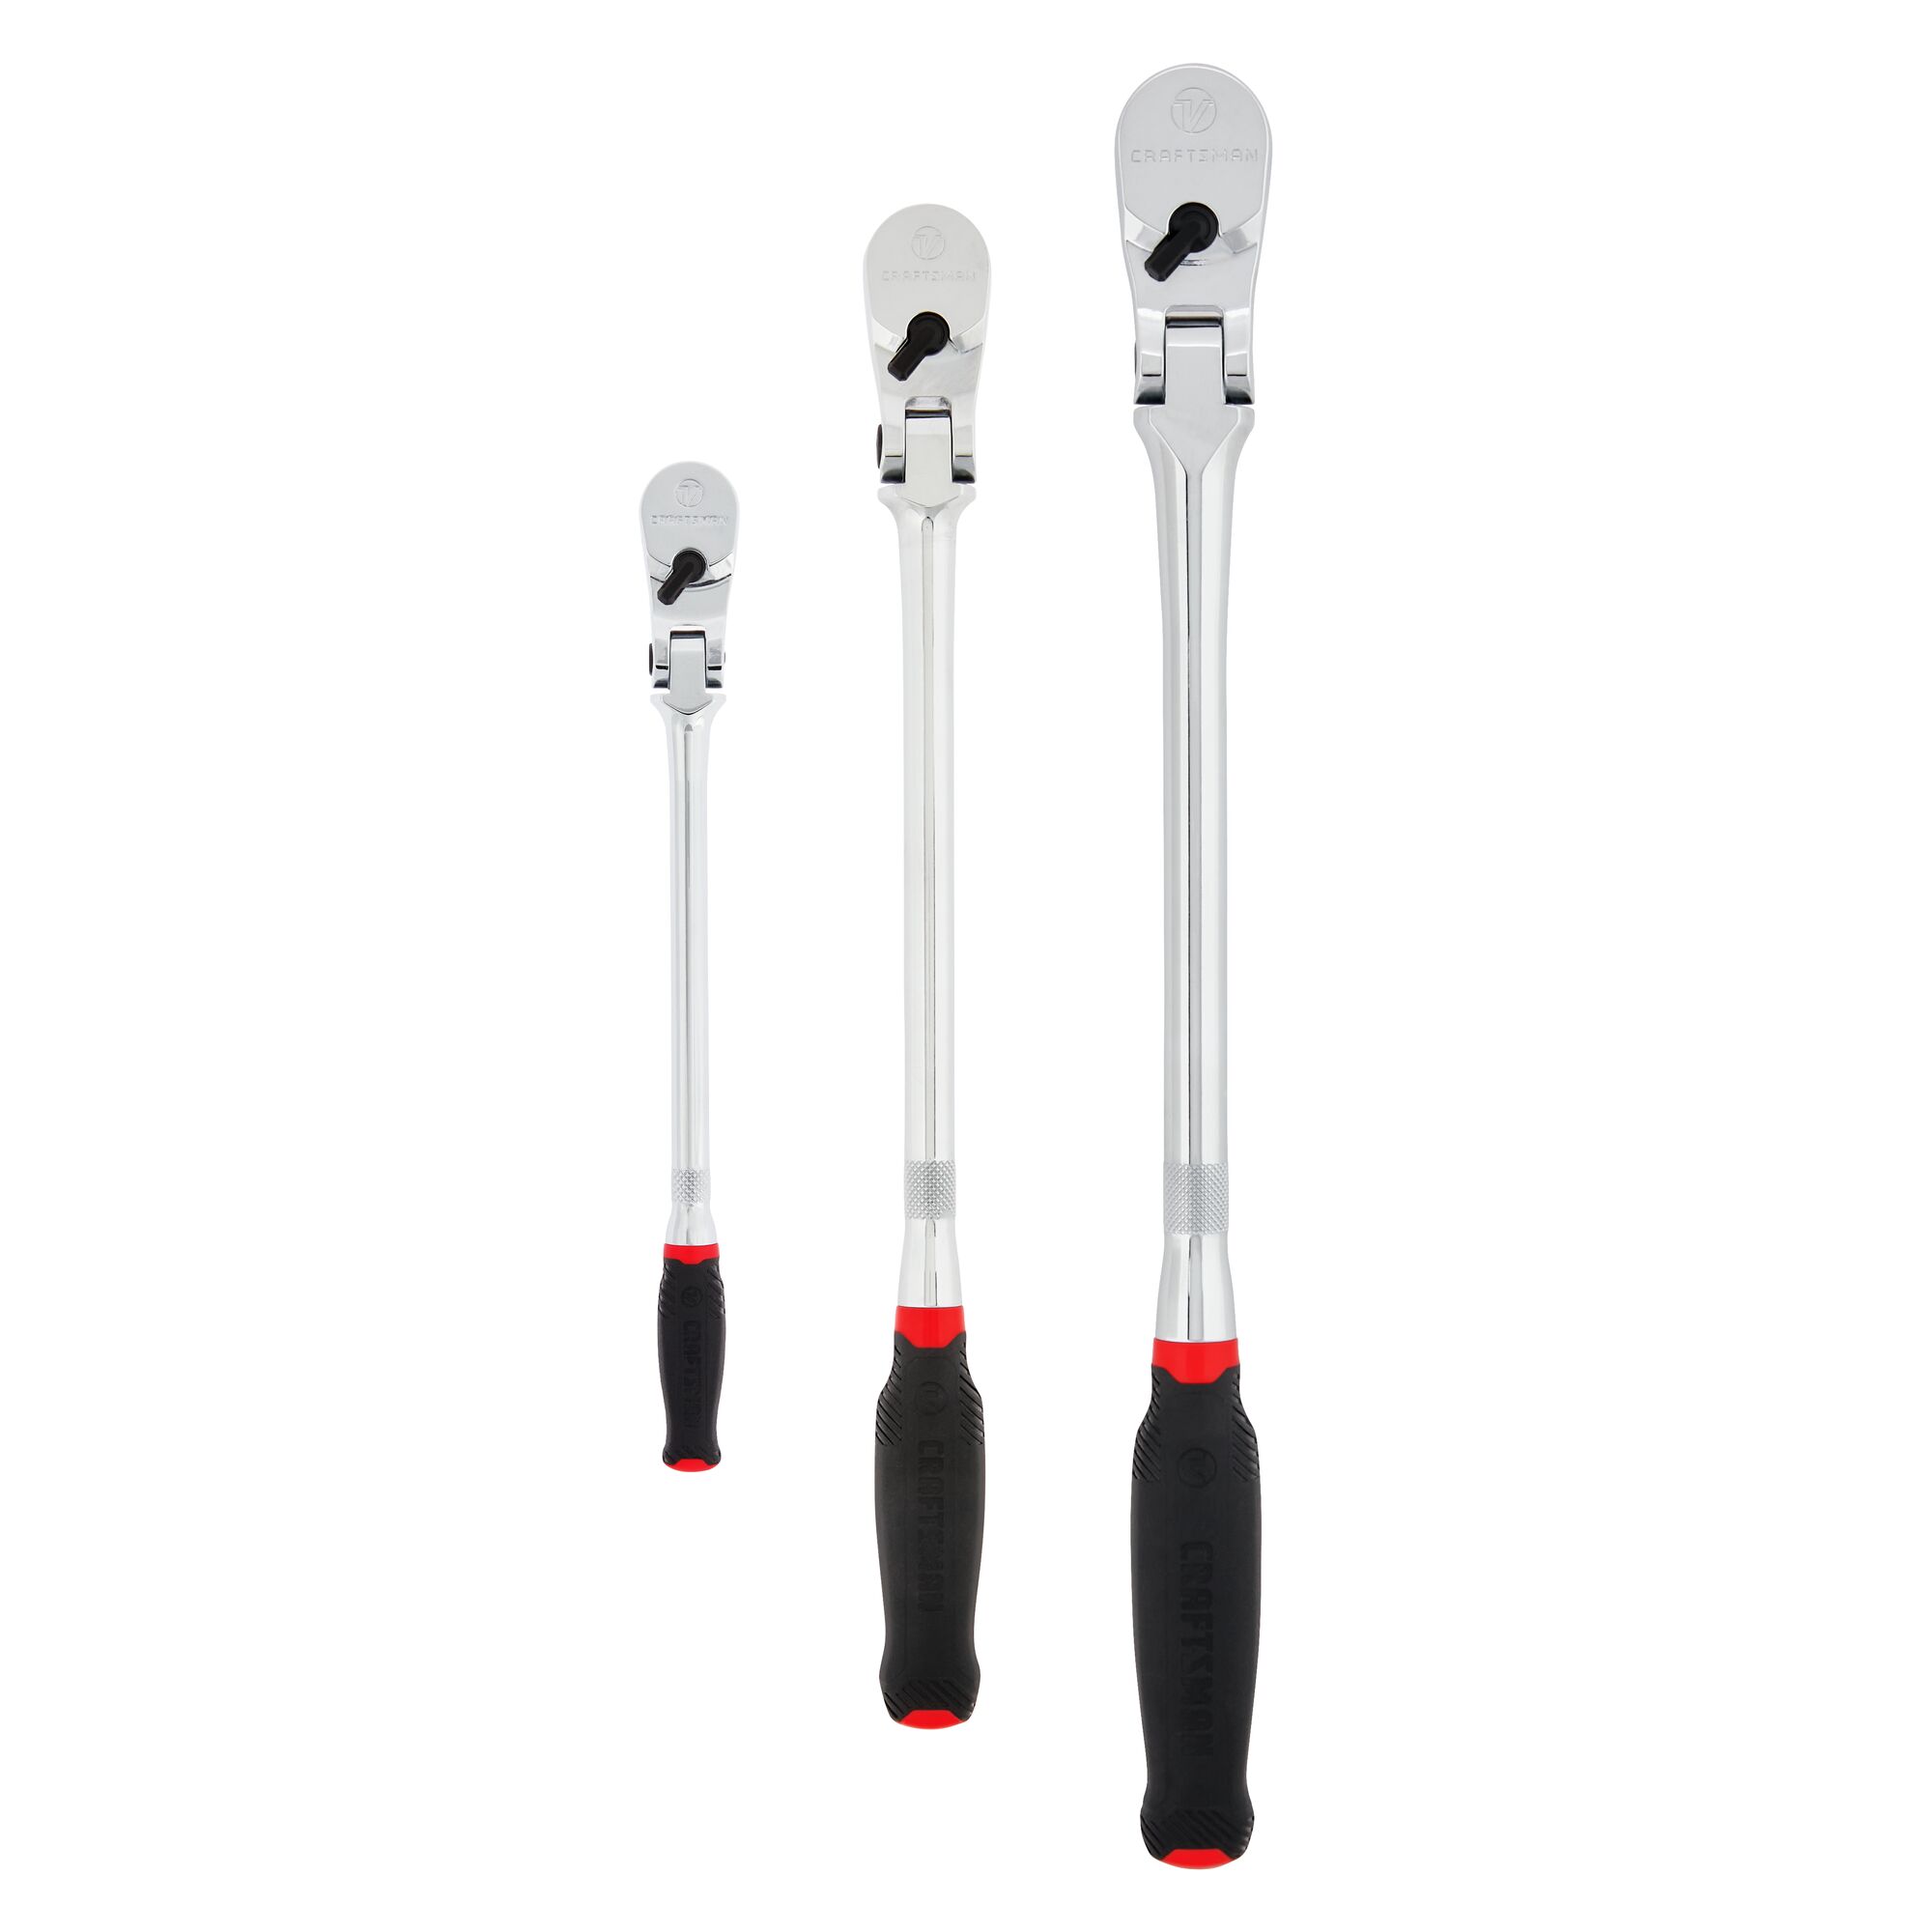 Profile of V series quarter inch three eighth inch and half inch drive comfort grip long flex head ratchet. 3 pack